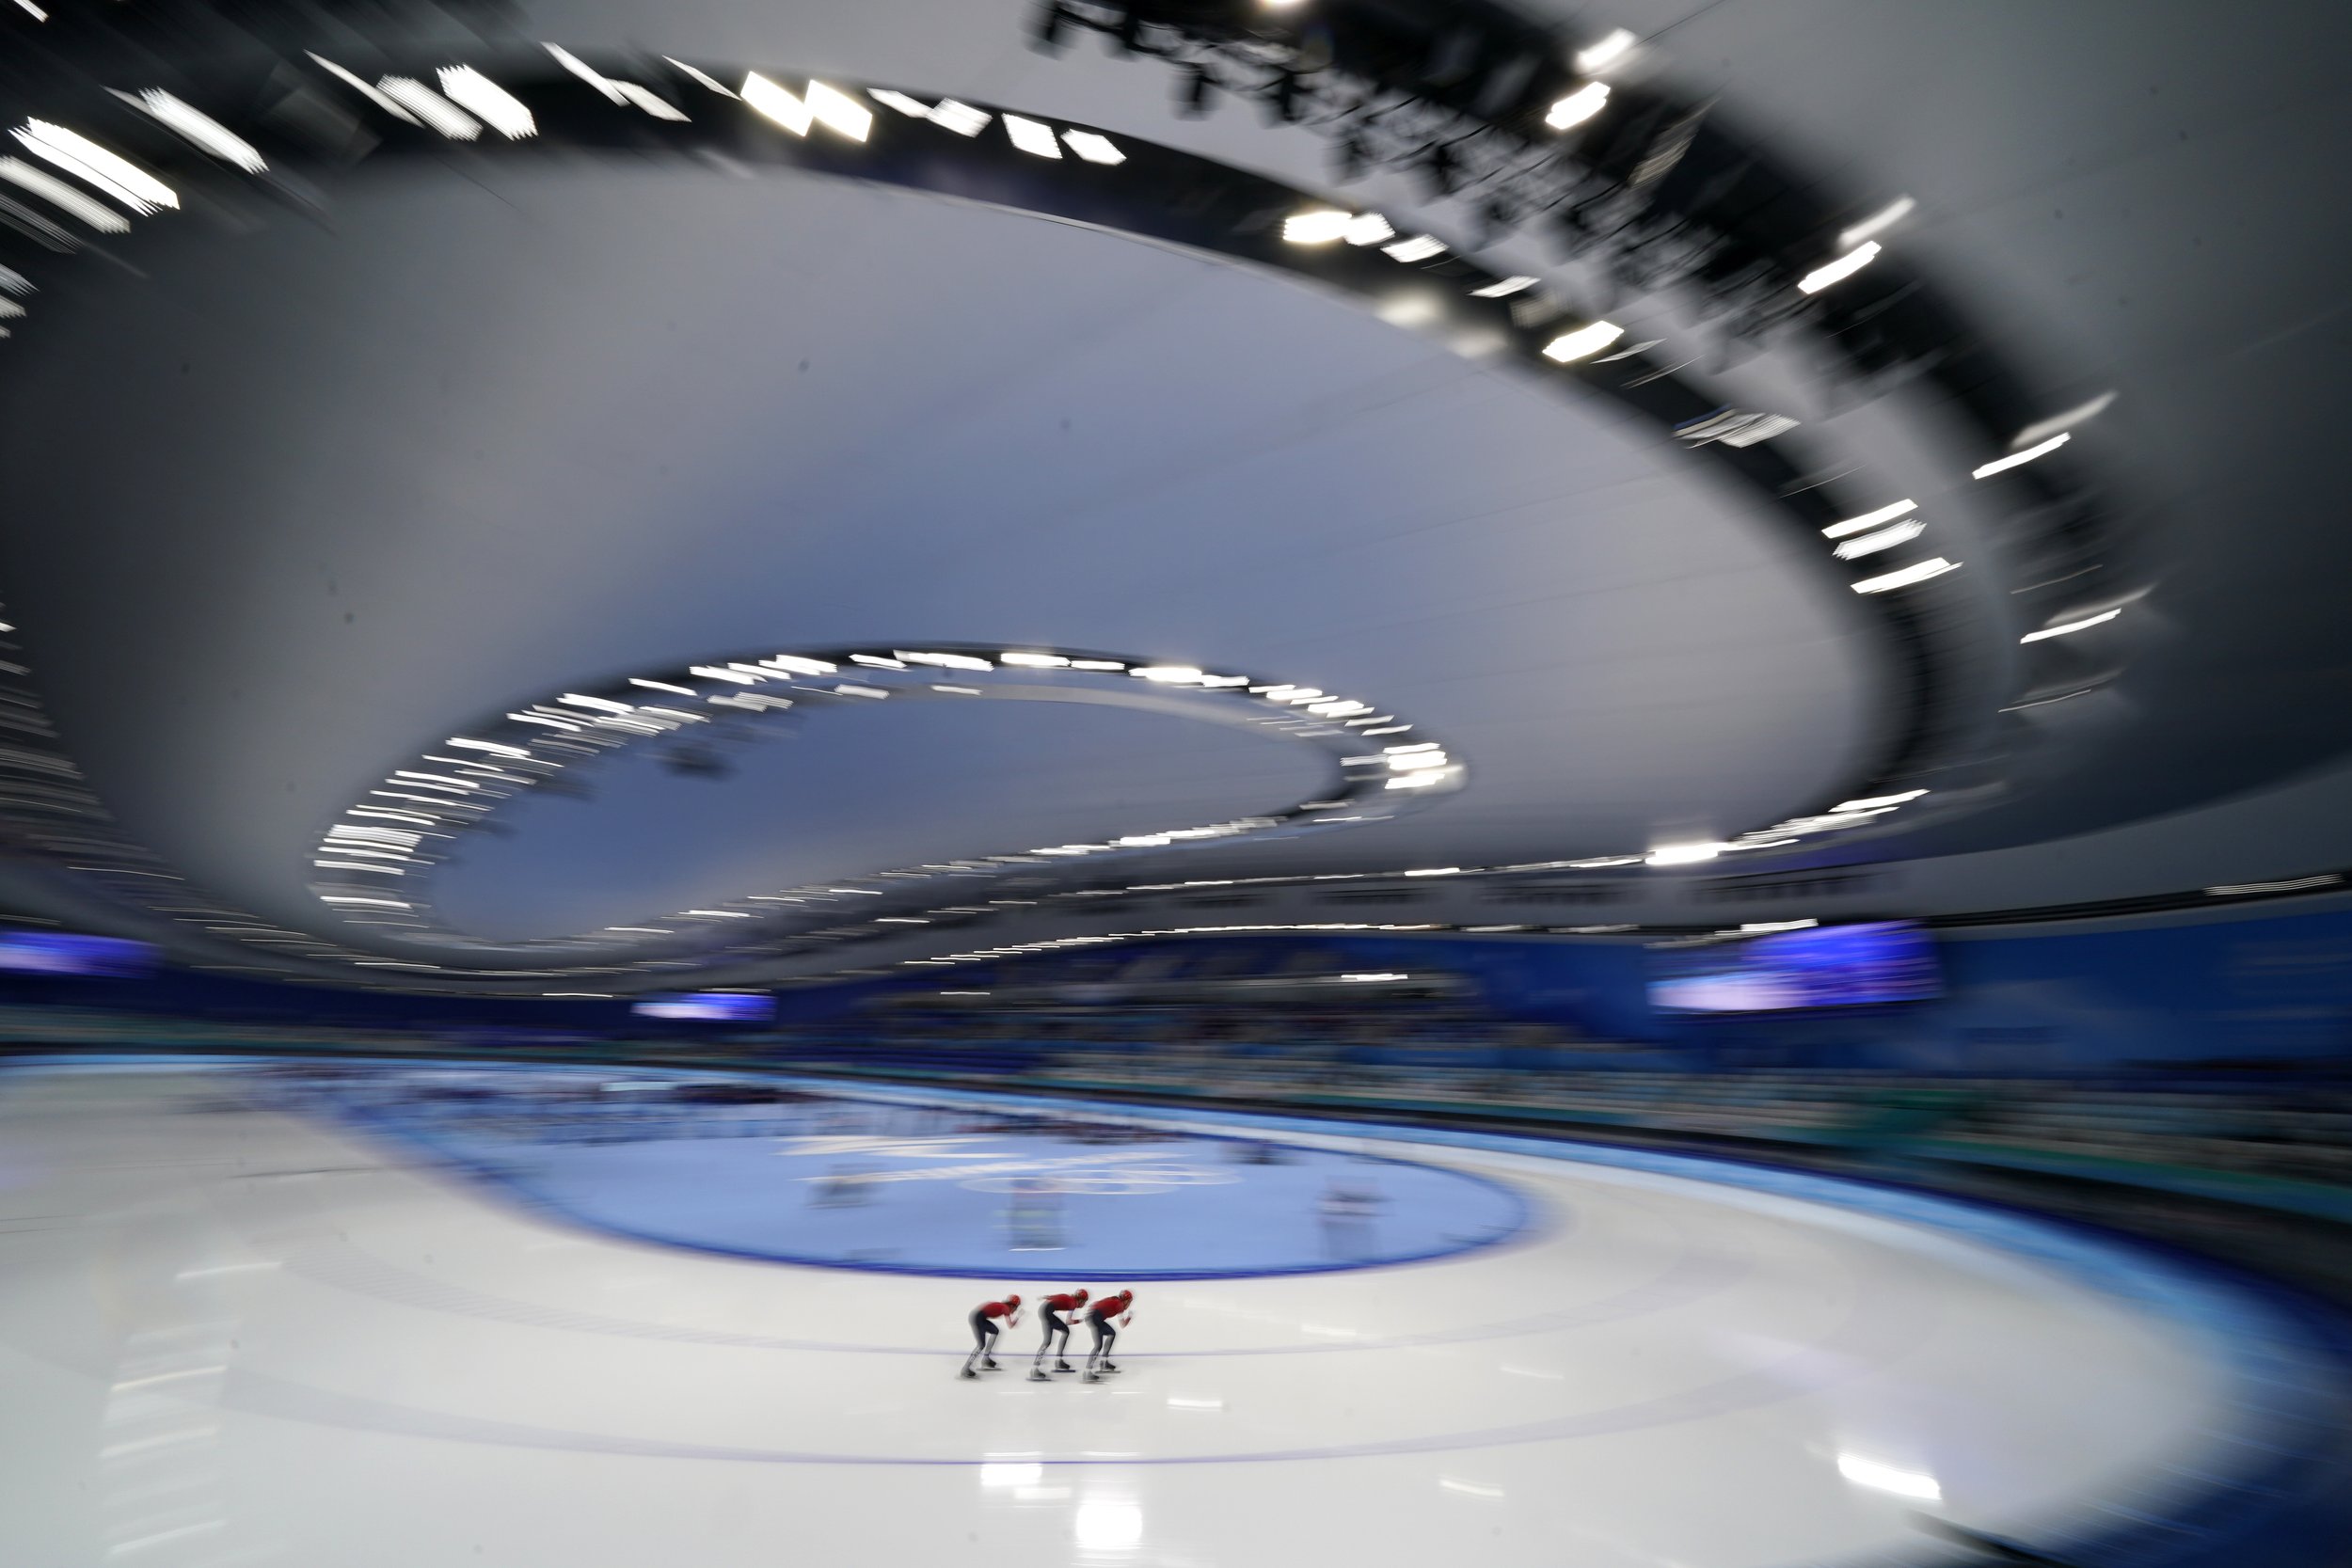  Team Norway competes in the speedskating women's team pursuit quarterfinals at the 2022 Winter Olympics, Saturday, Feb. 12, 2022, in Beijing. (AP Photo/Ashley Landis) 